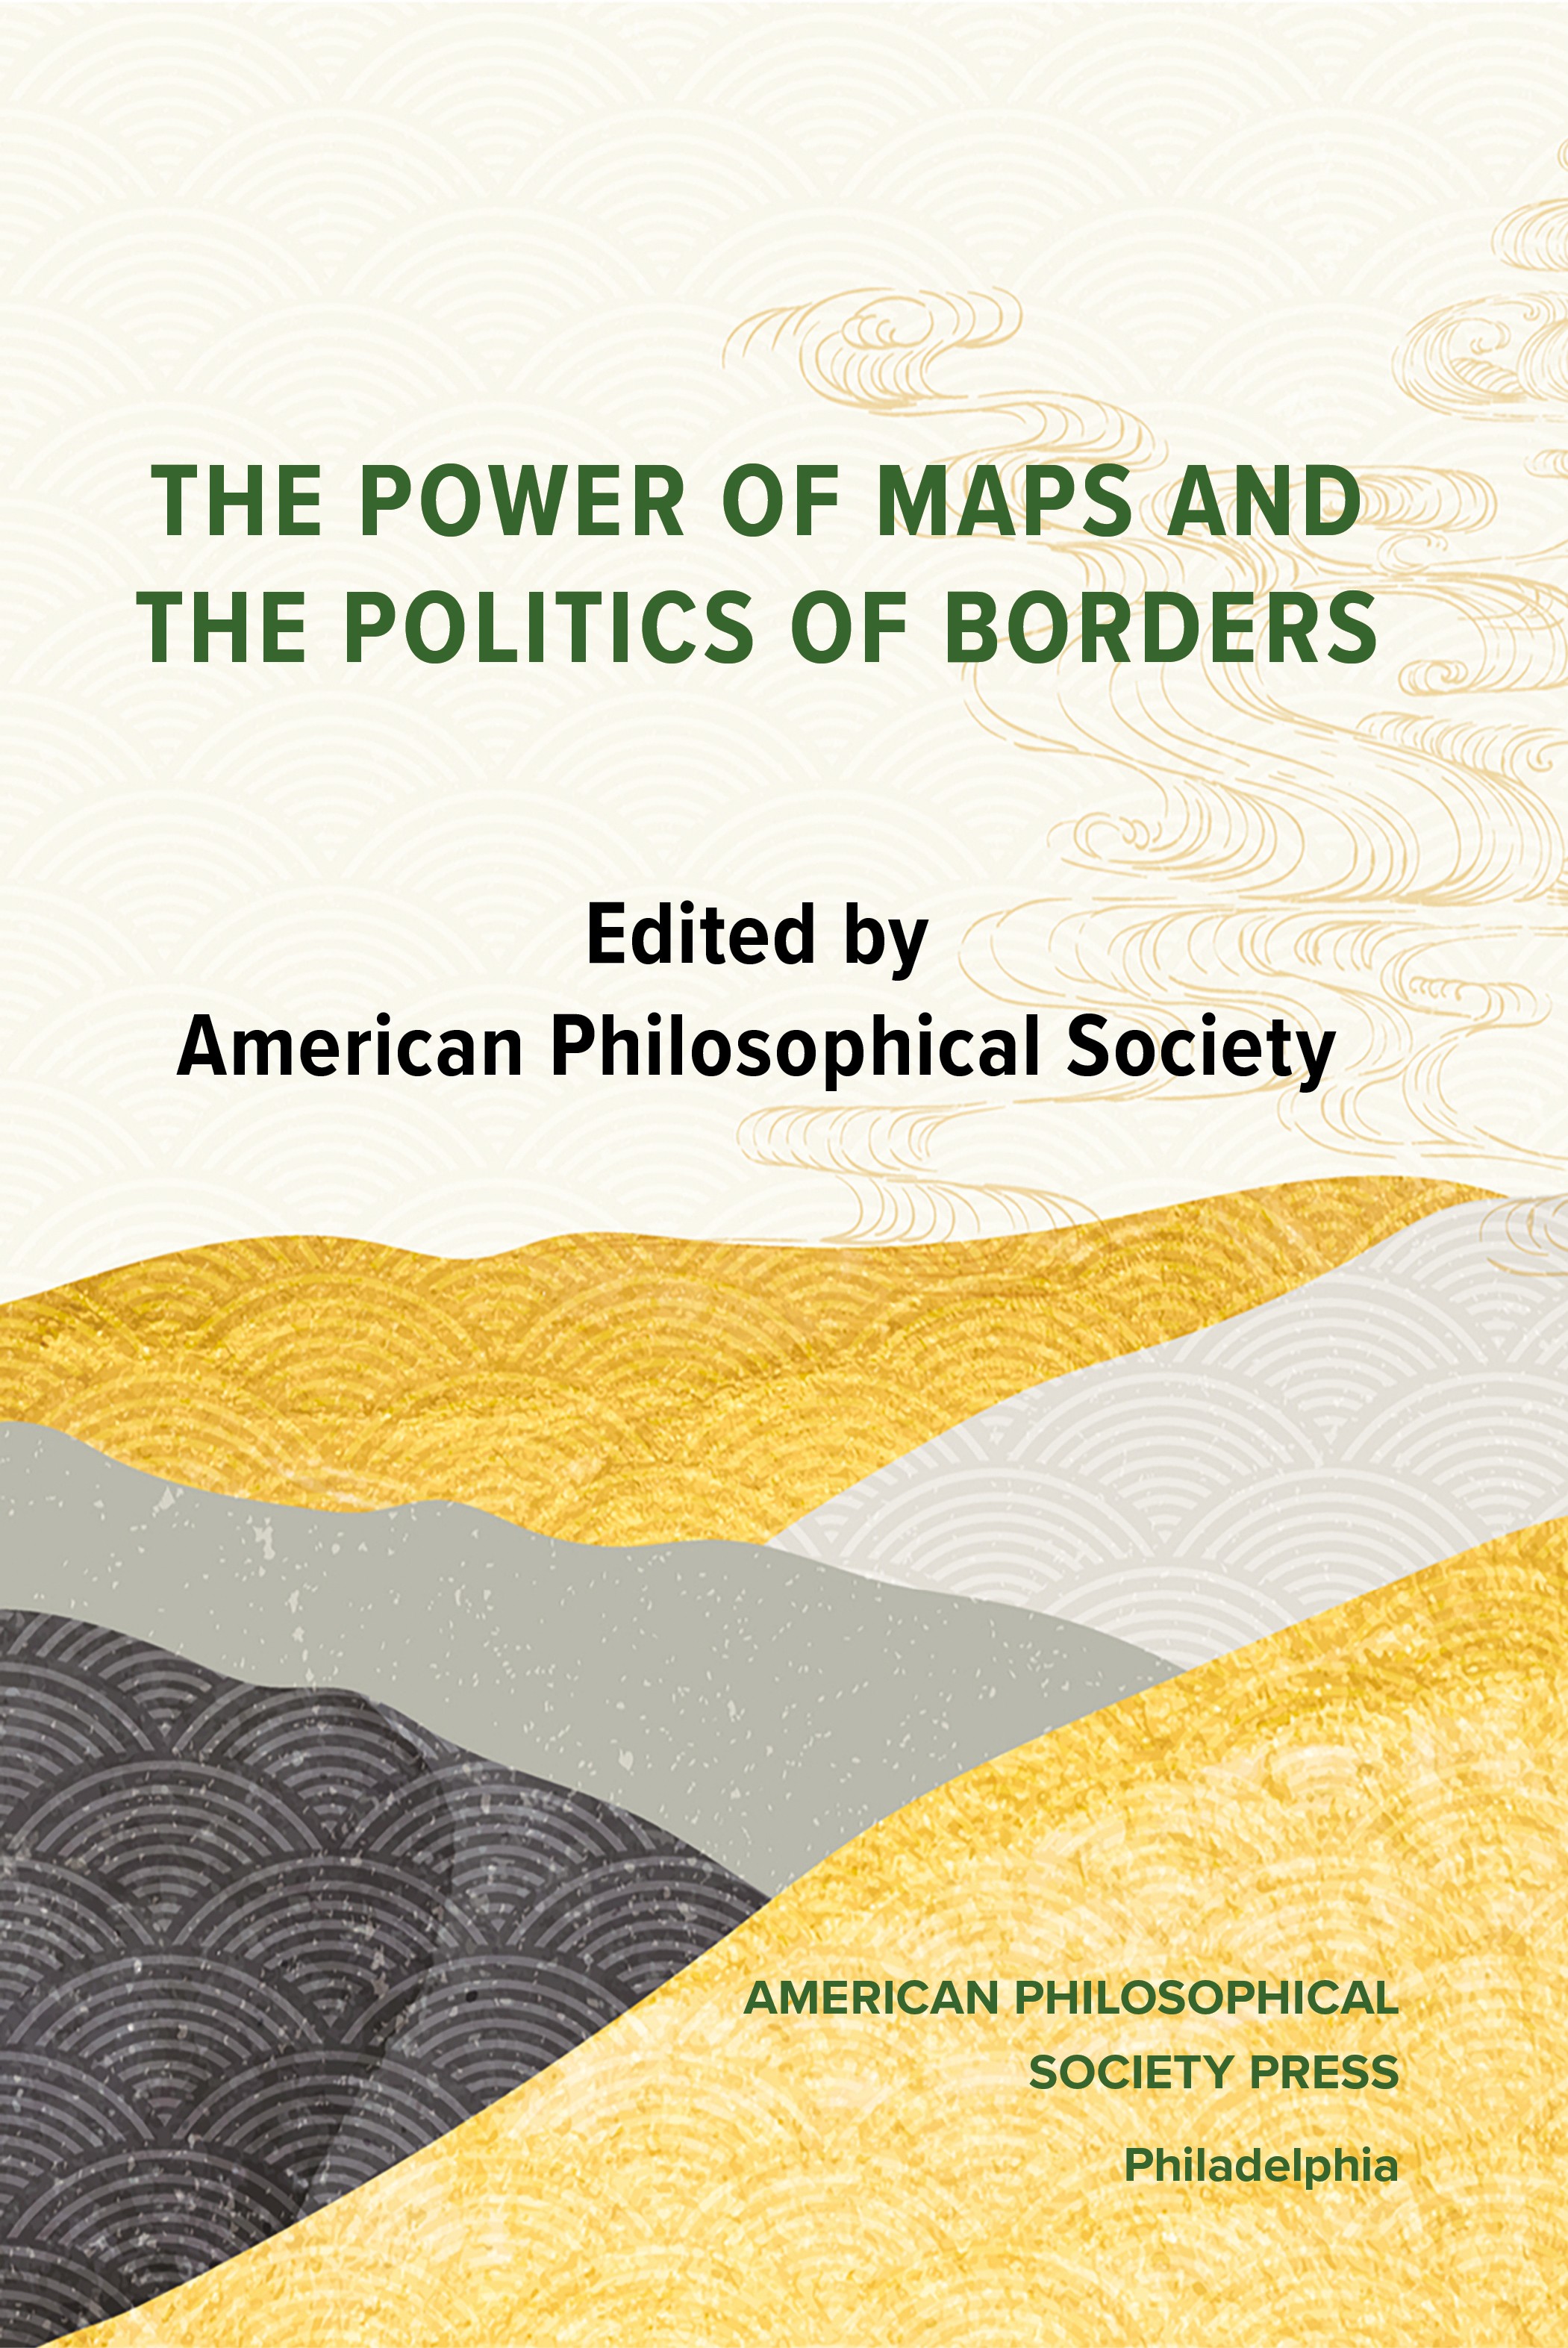 The Power of Maps and The Politics of Borders